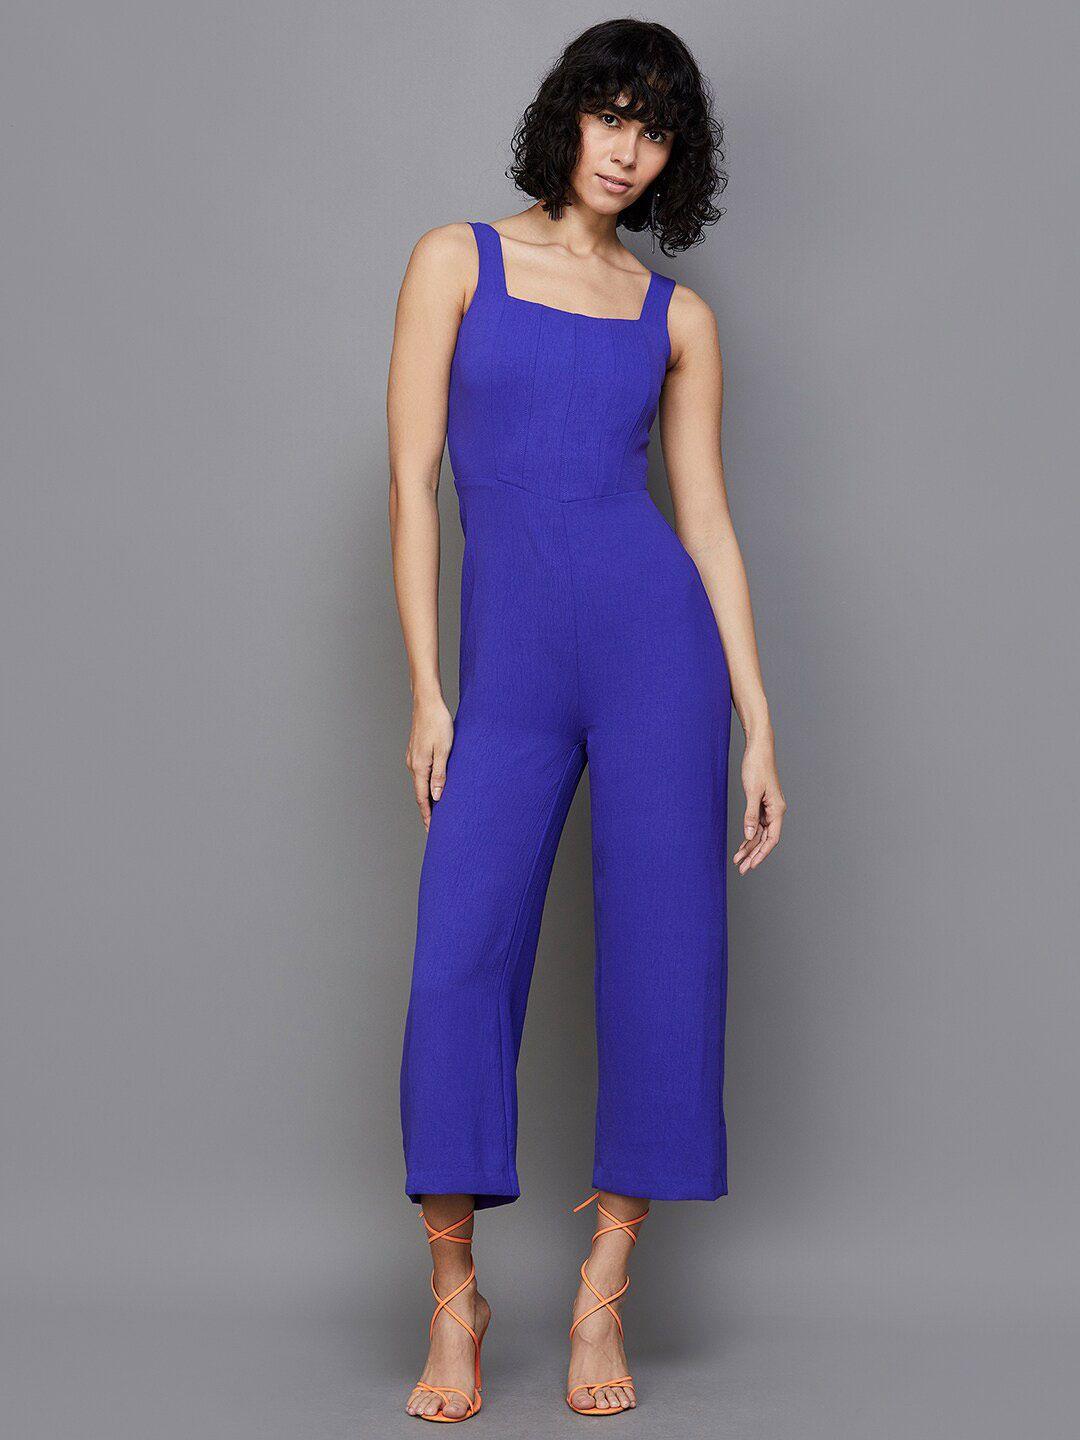 ginger by lifestyle culotte jumpsuit